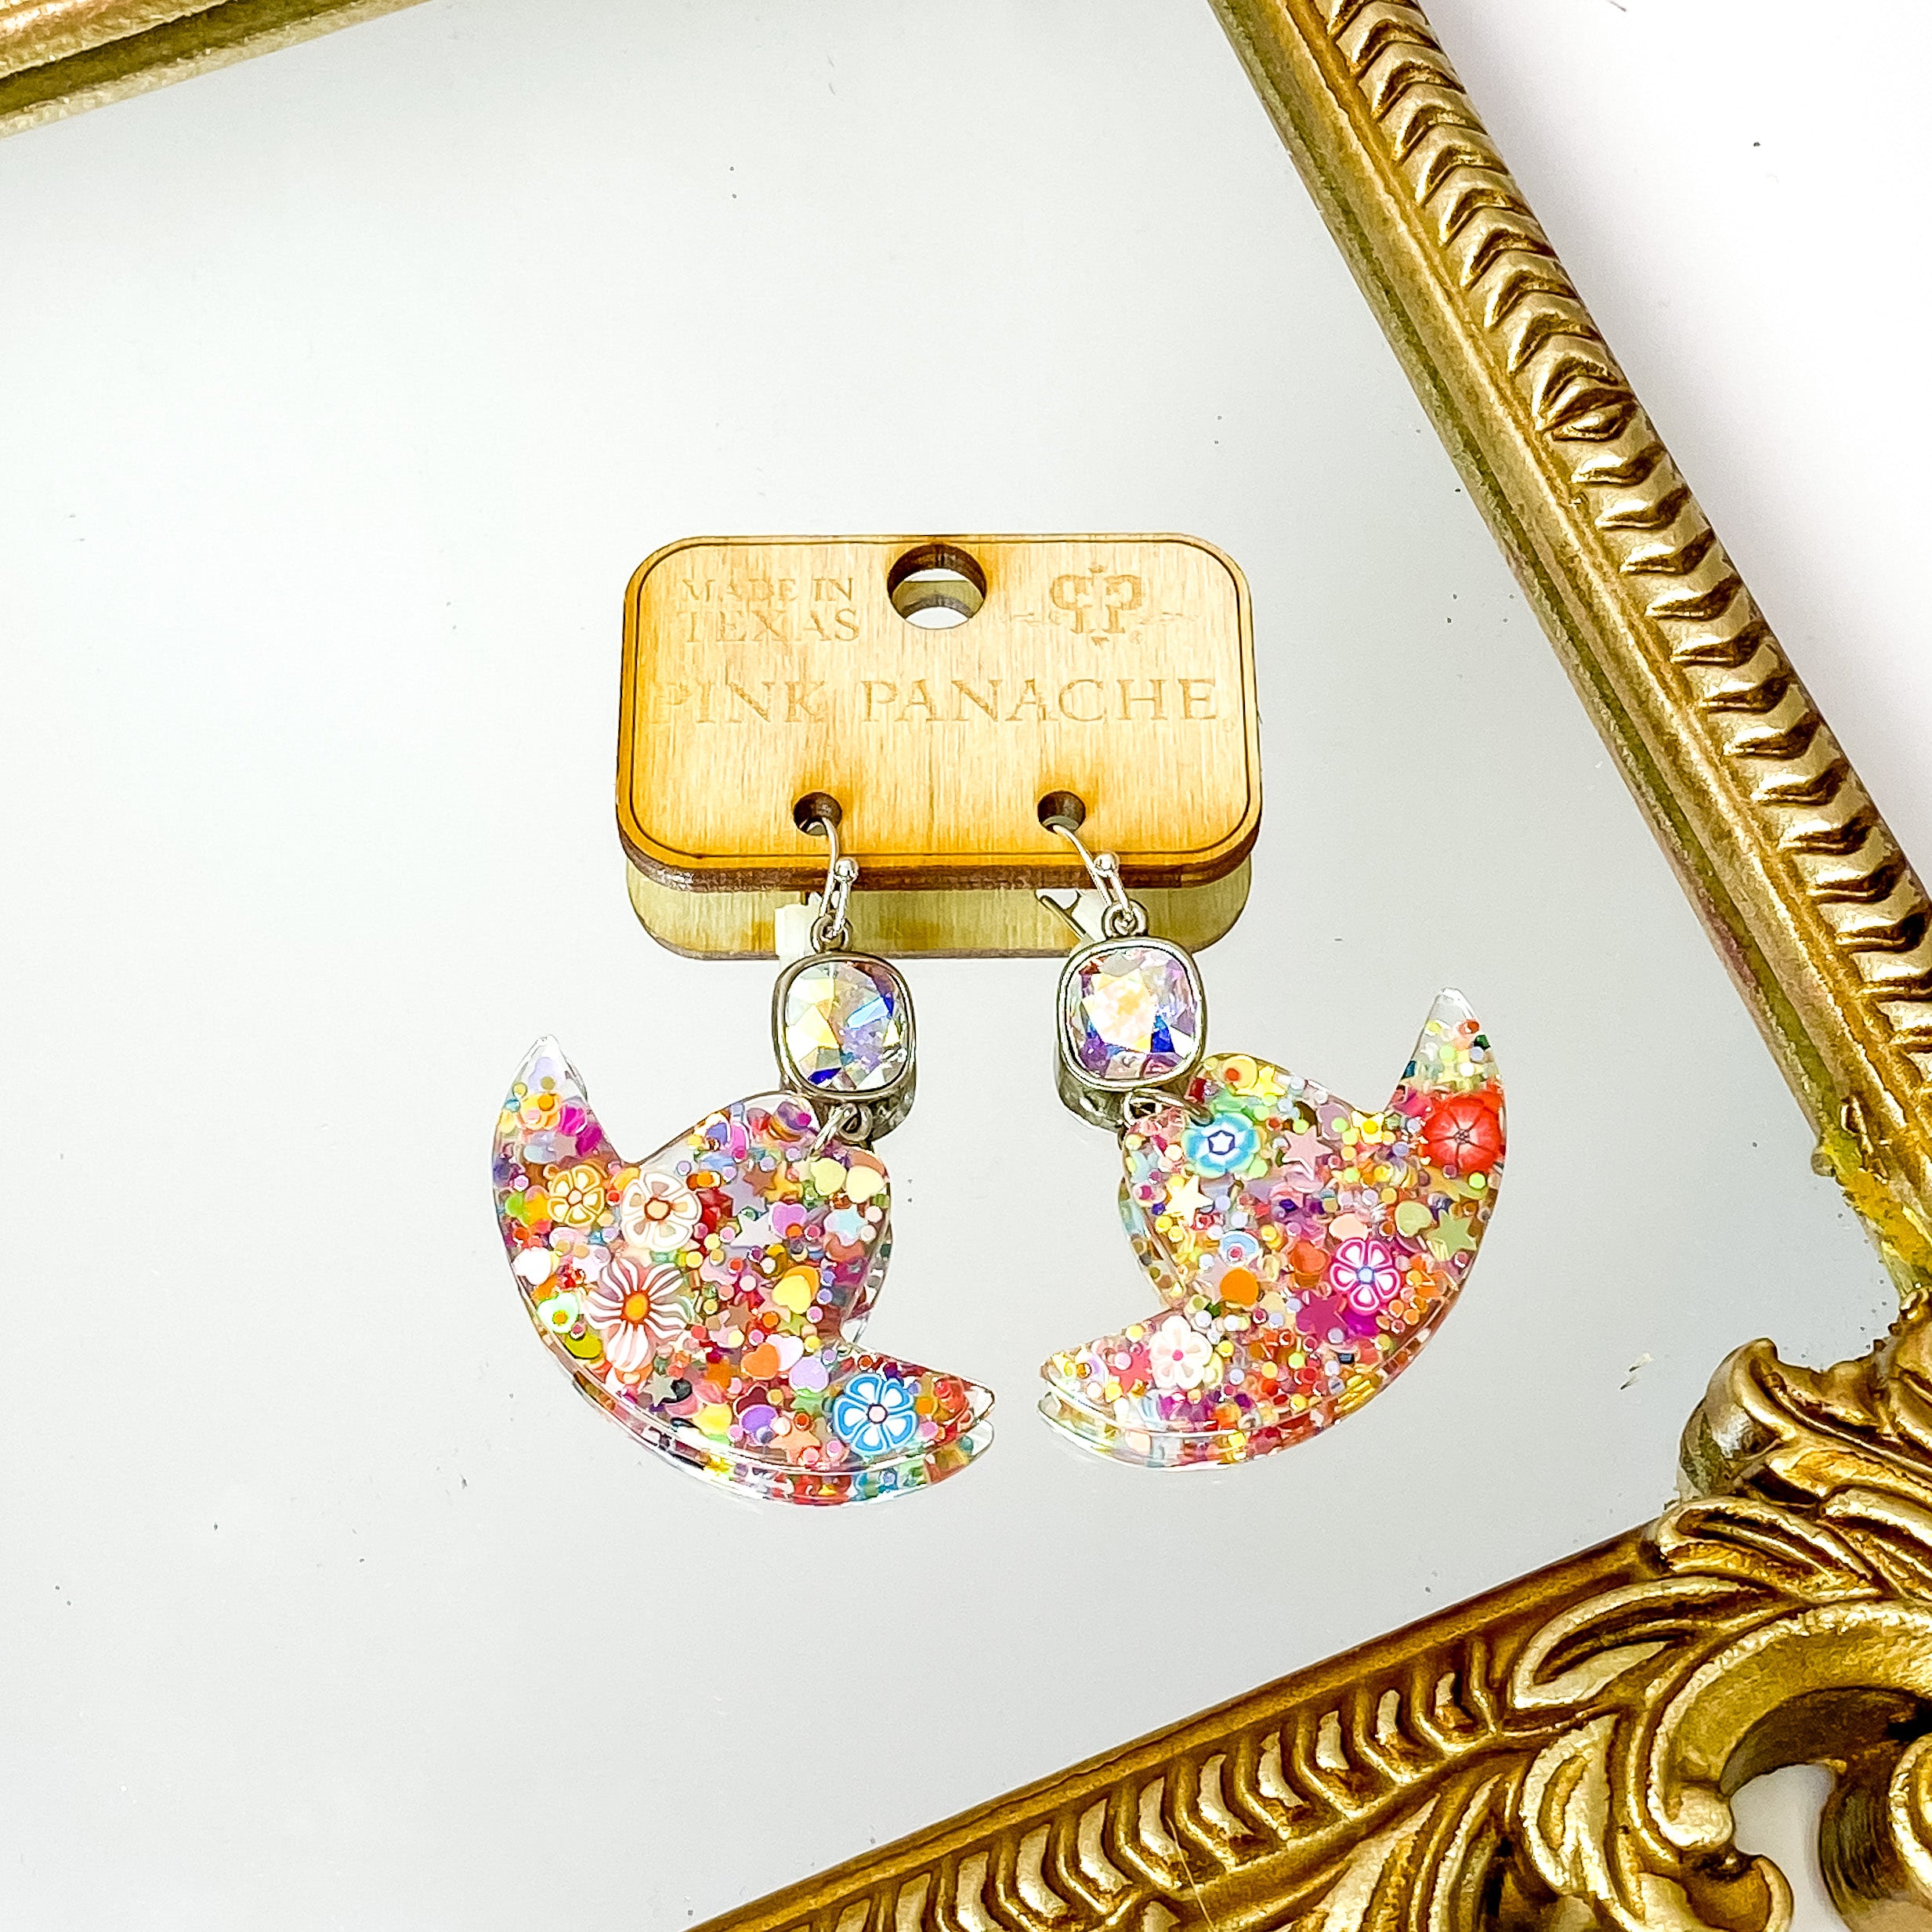 Silver, cushion cut AB crystal drop earrings with a hanging hat pendant. This pendant has multicolor glitter all over. These earrings are pictured on a wood earrings holder on a gold mirror on a white background. 